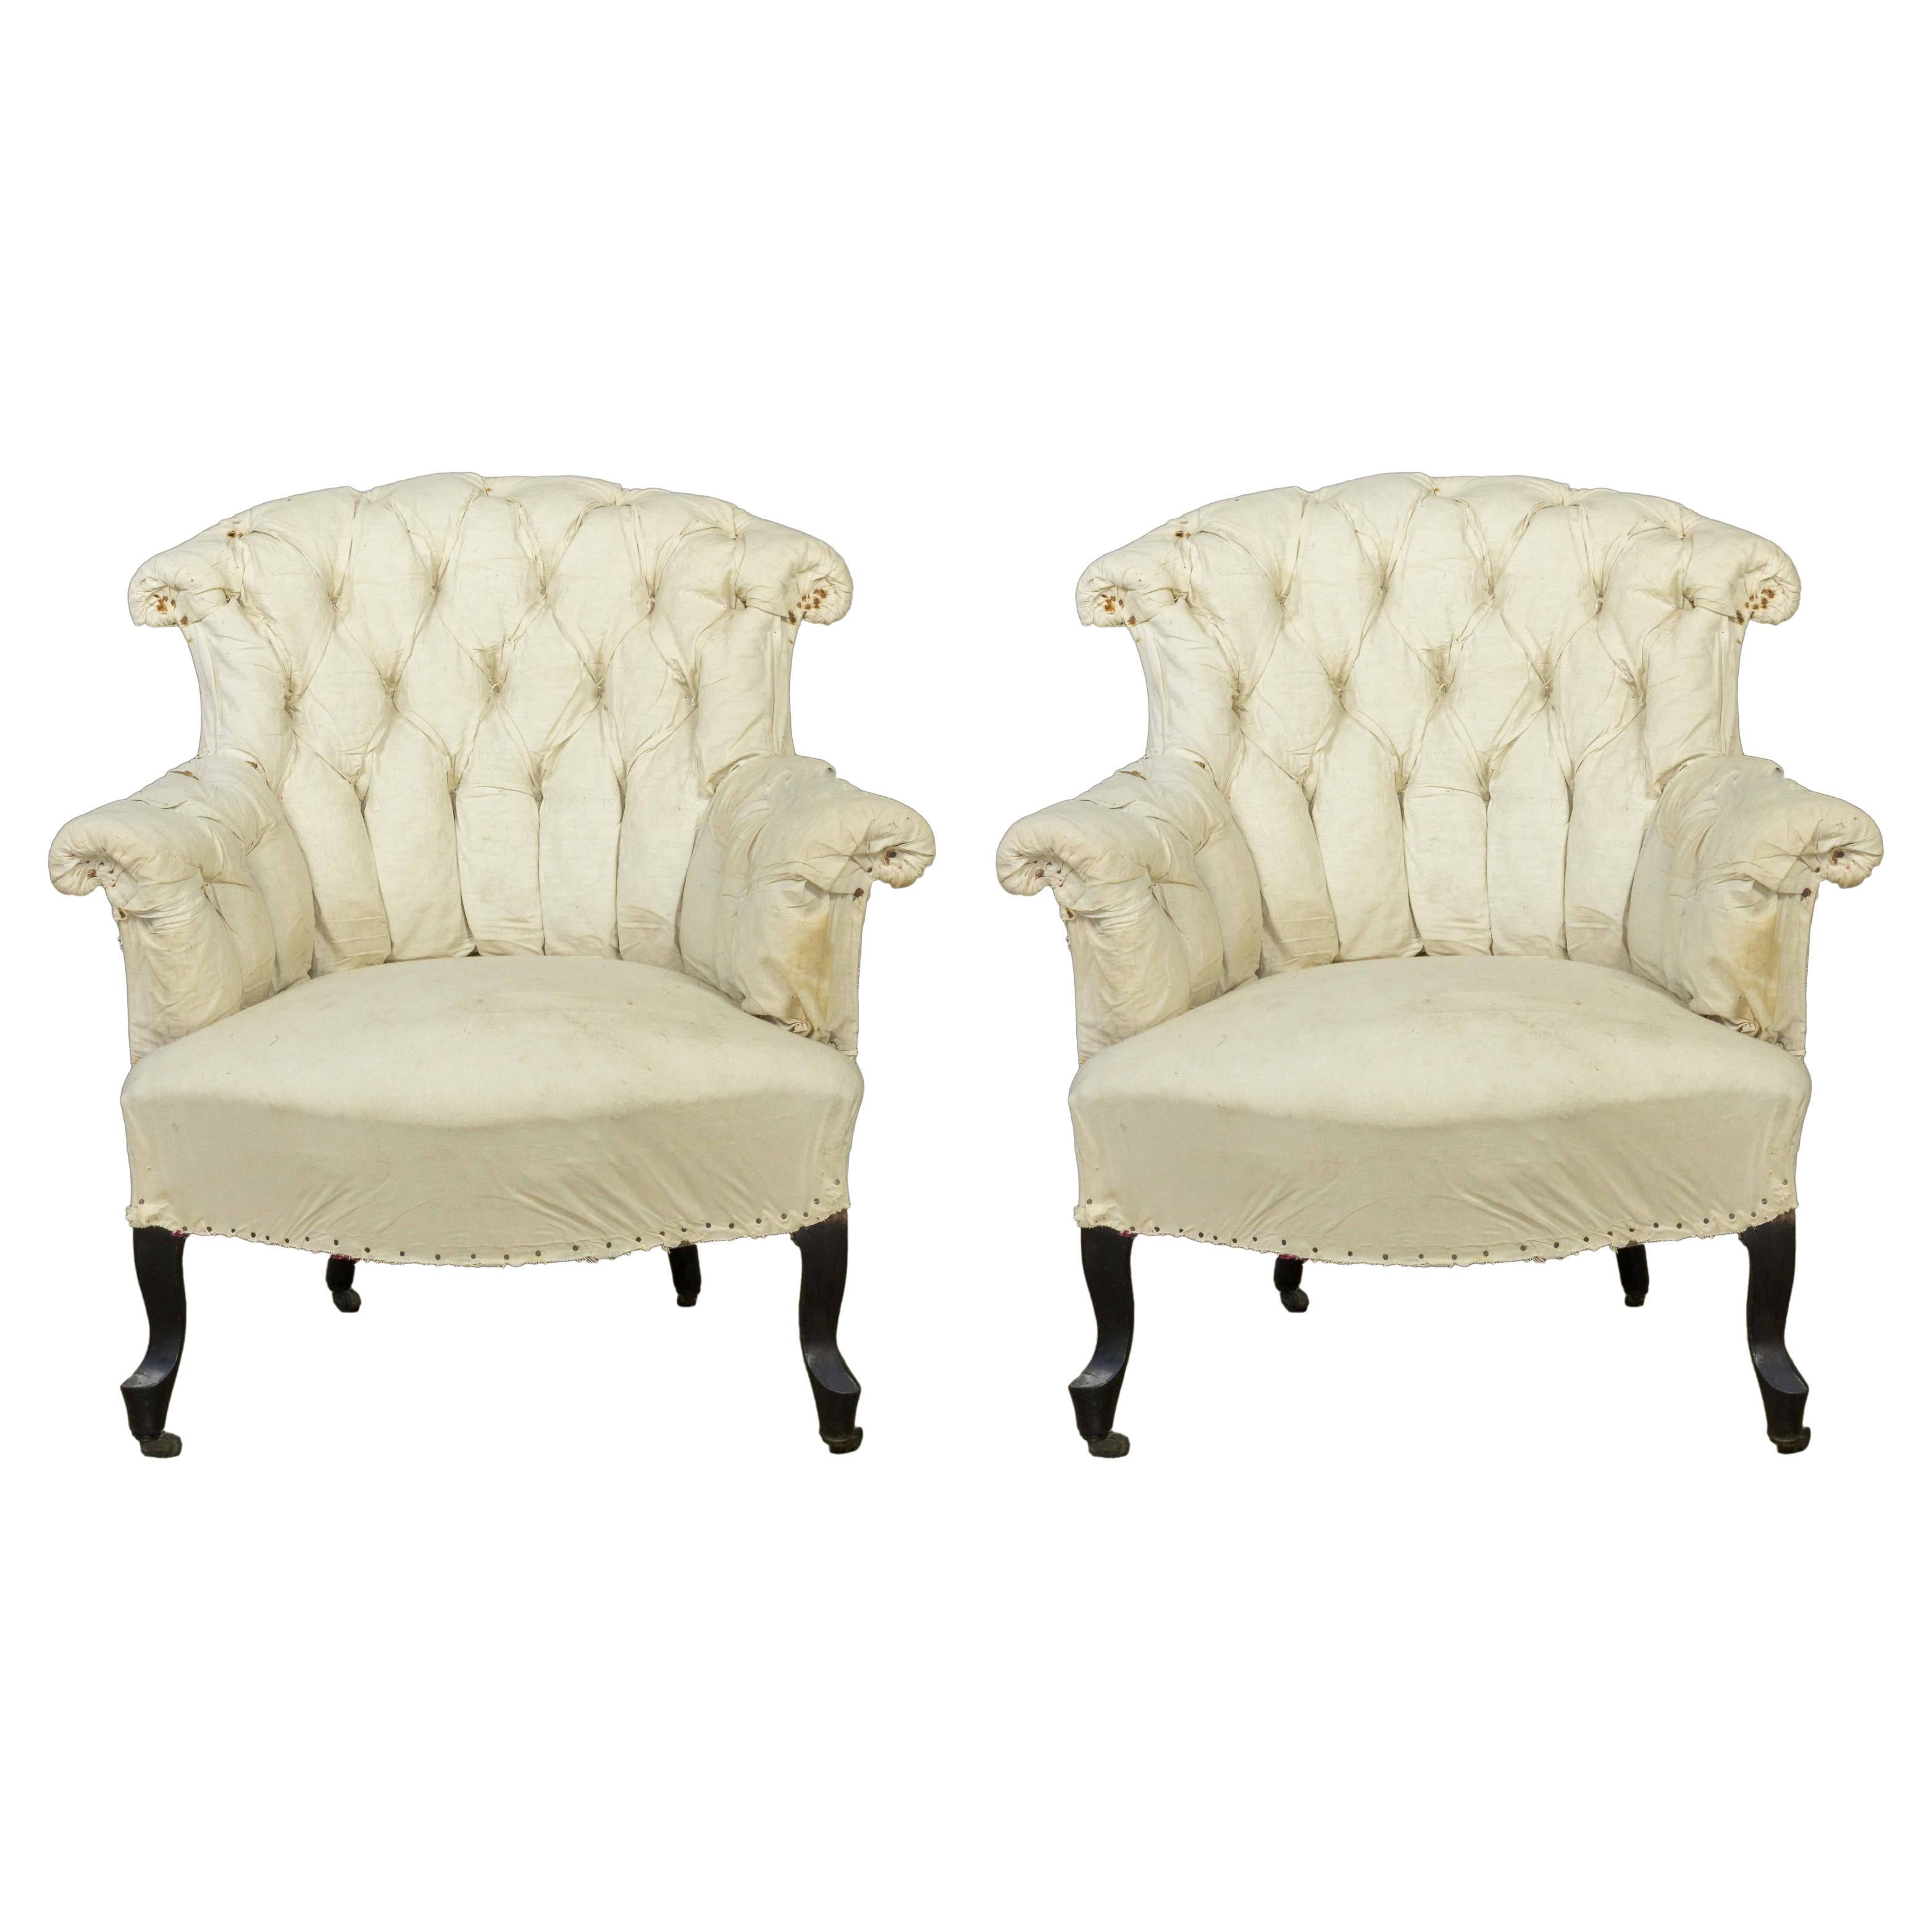 Pair of French 19th C Tufted Armchairs in Muslin